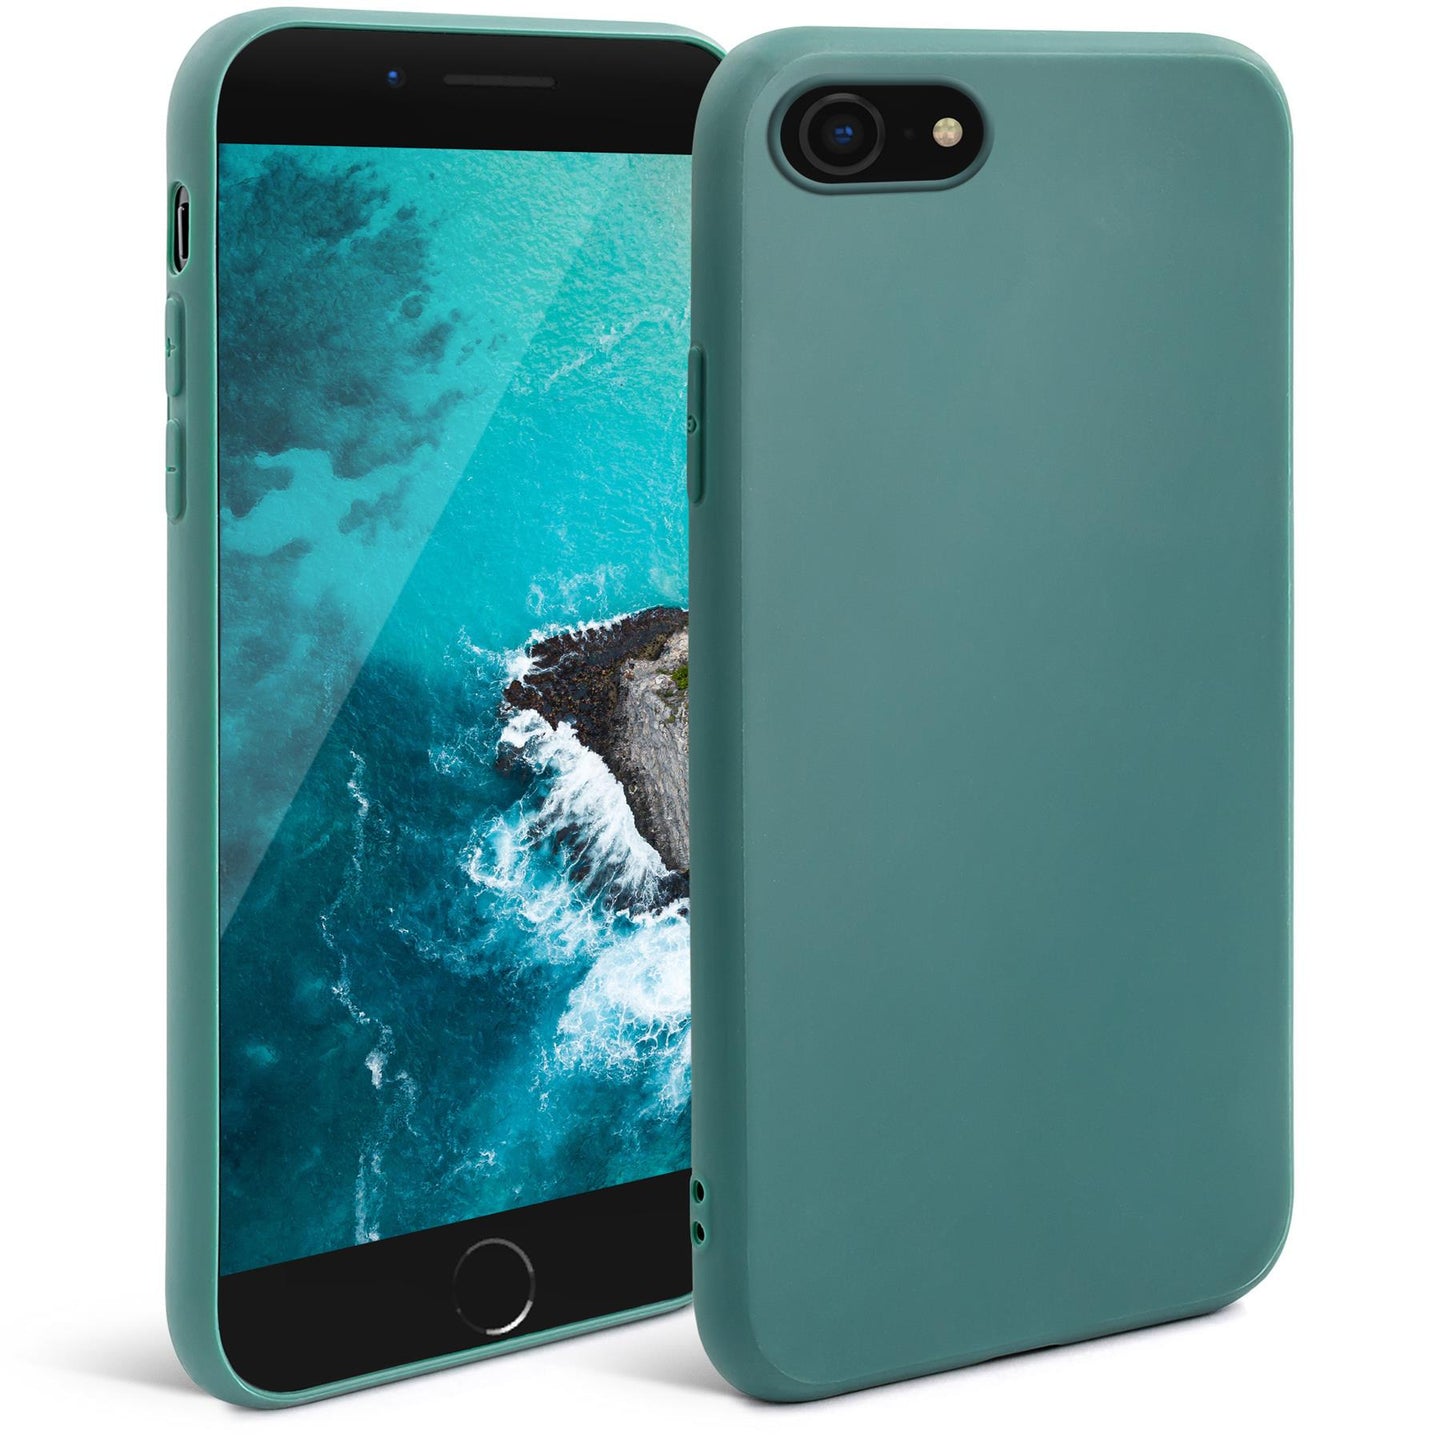 Moozy Minimalist Series Silicone Case for iPhone SE 2020, iPhone 8 and iPhone 7, Blue Grey - Matte Finish Slim Soft TPU Cover